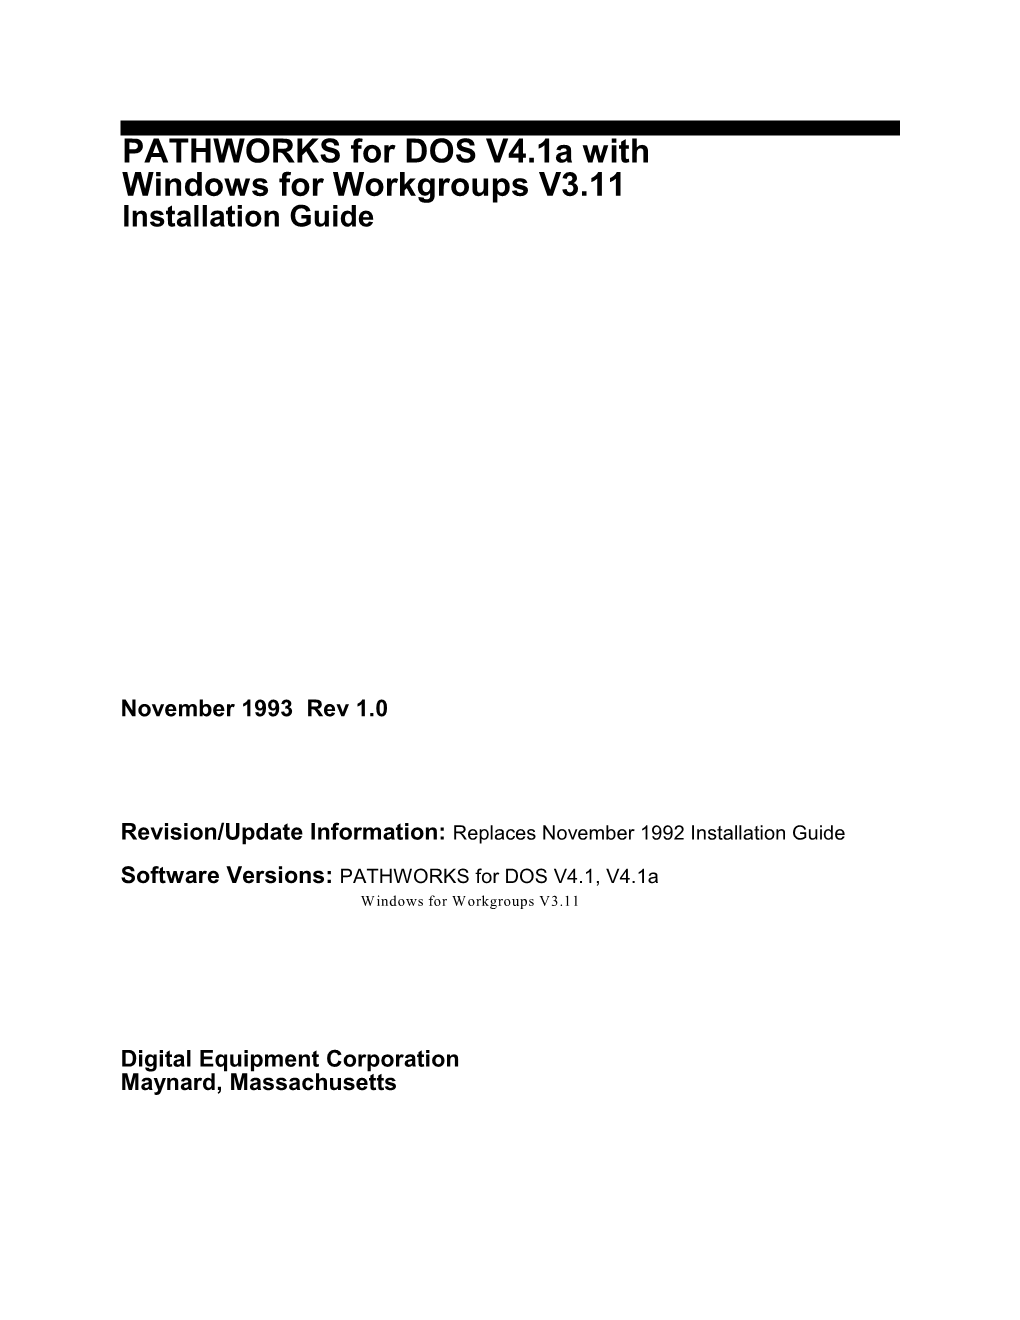 PATHWORKS for DOS V4.1A with Windows for Workgroups V3.11 Installation Guide